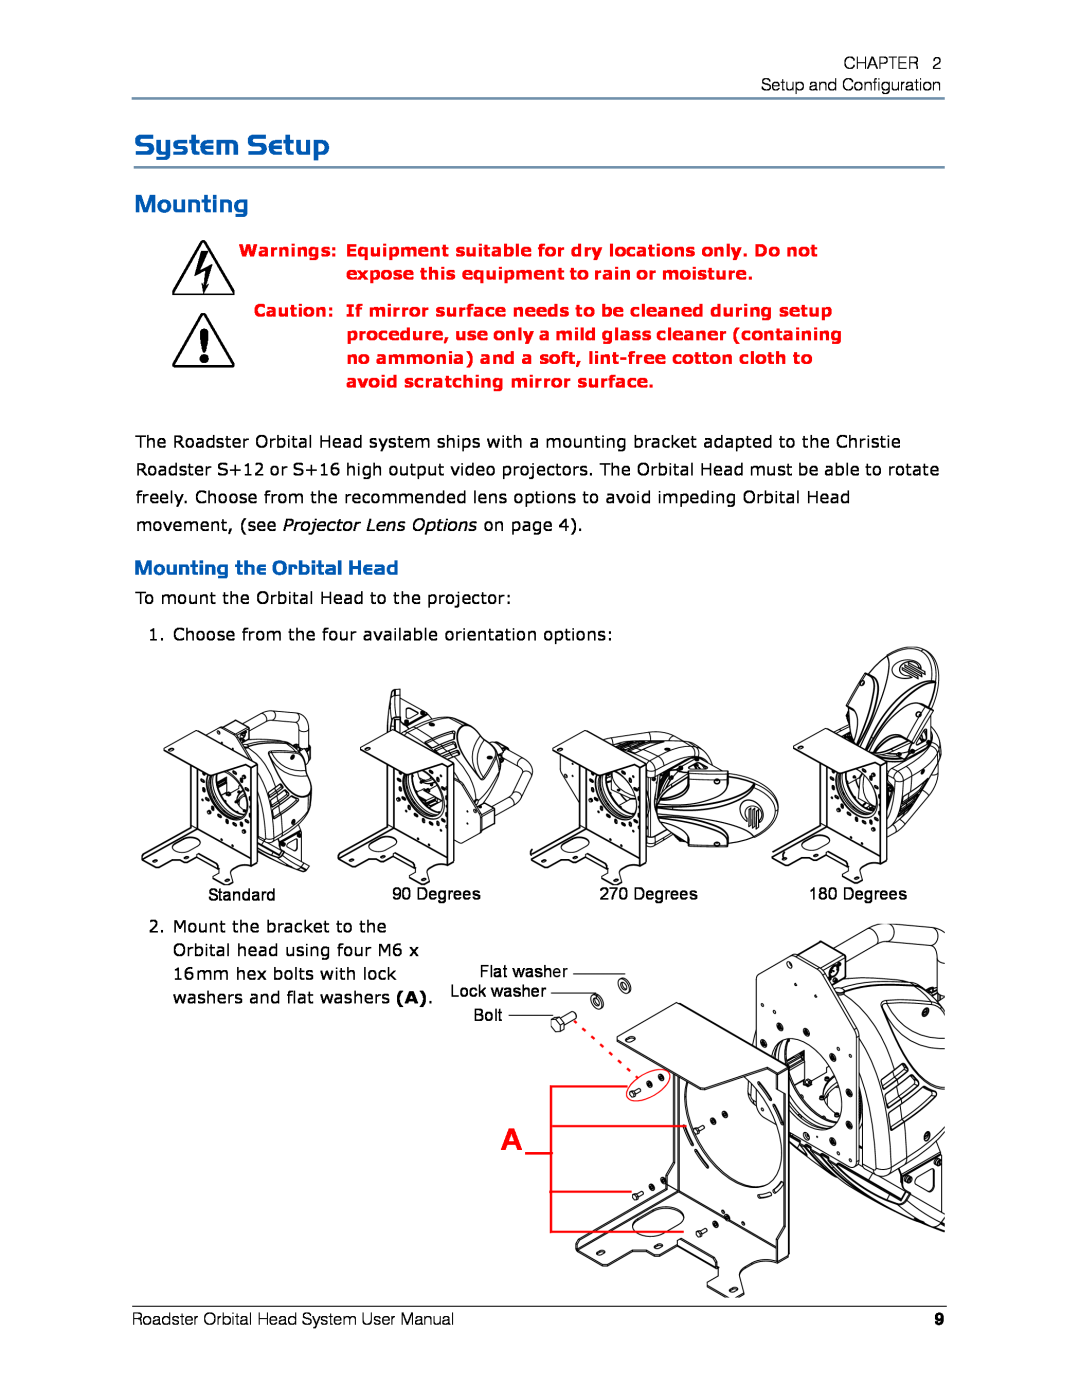 High End Systems Roadster Orbital Head System user manual System Setup, Mounting the Orbital Head 